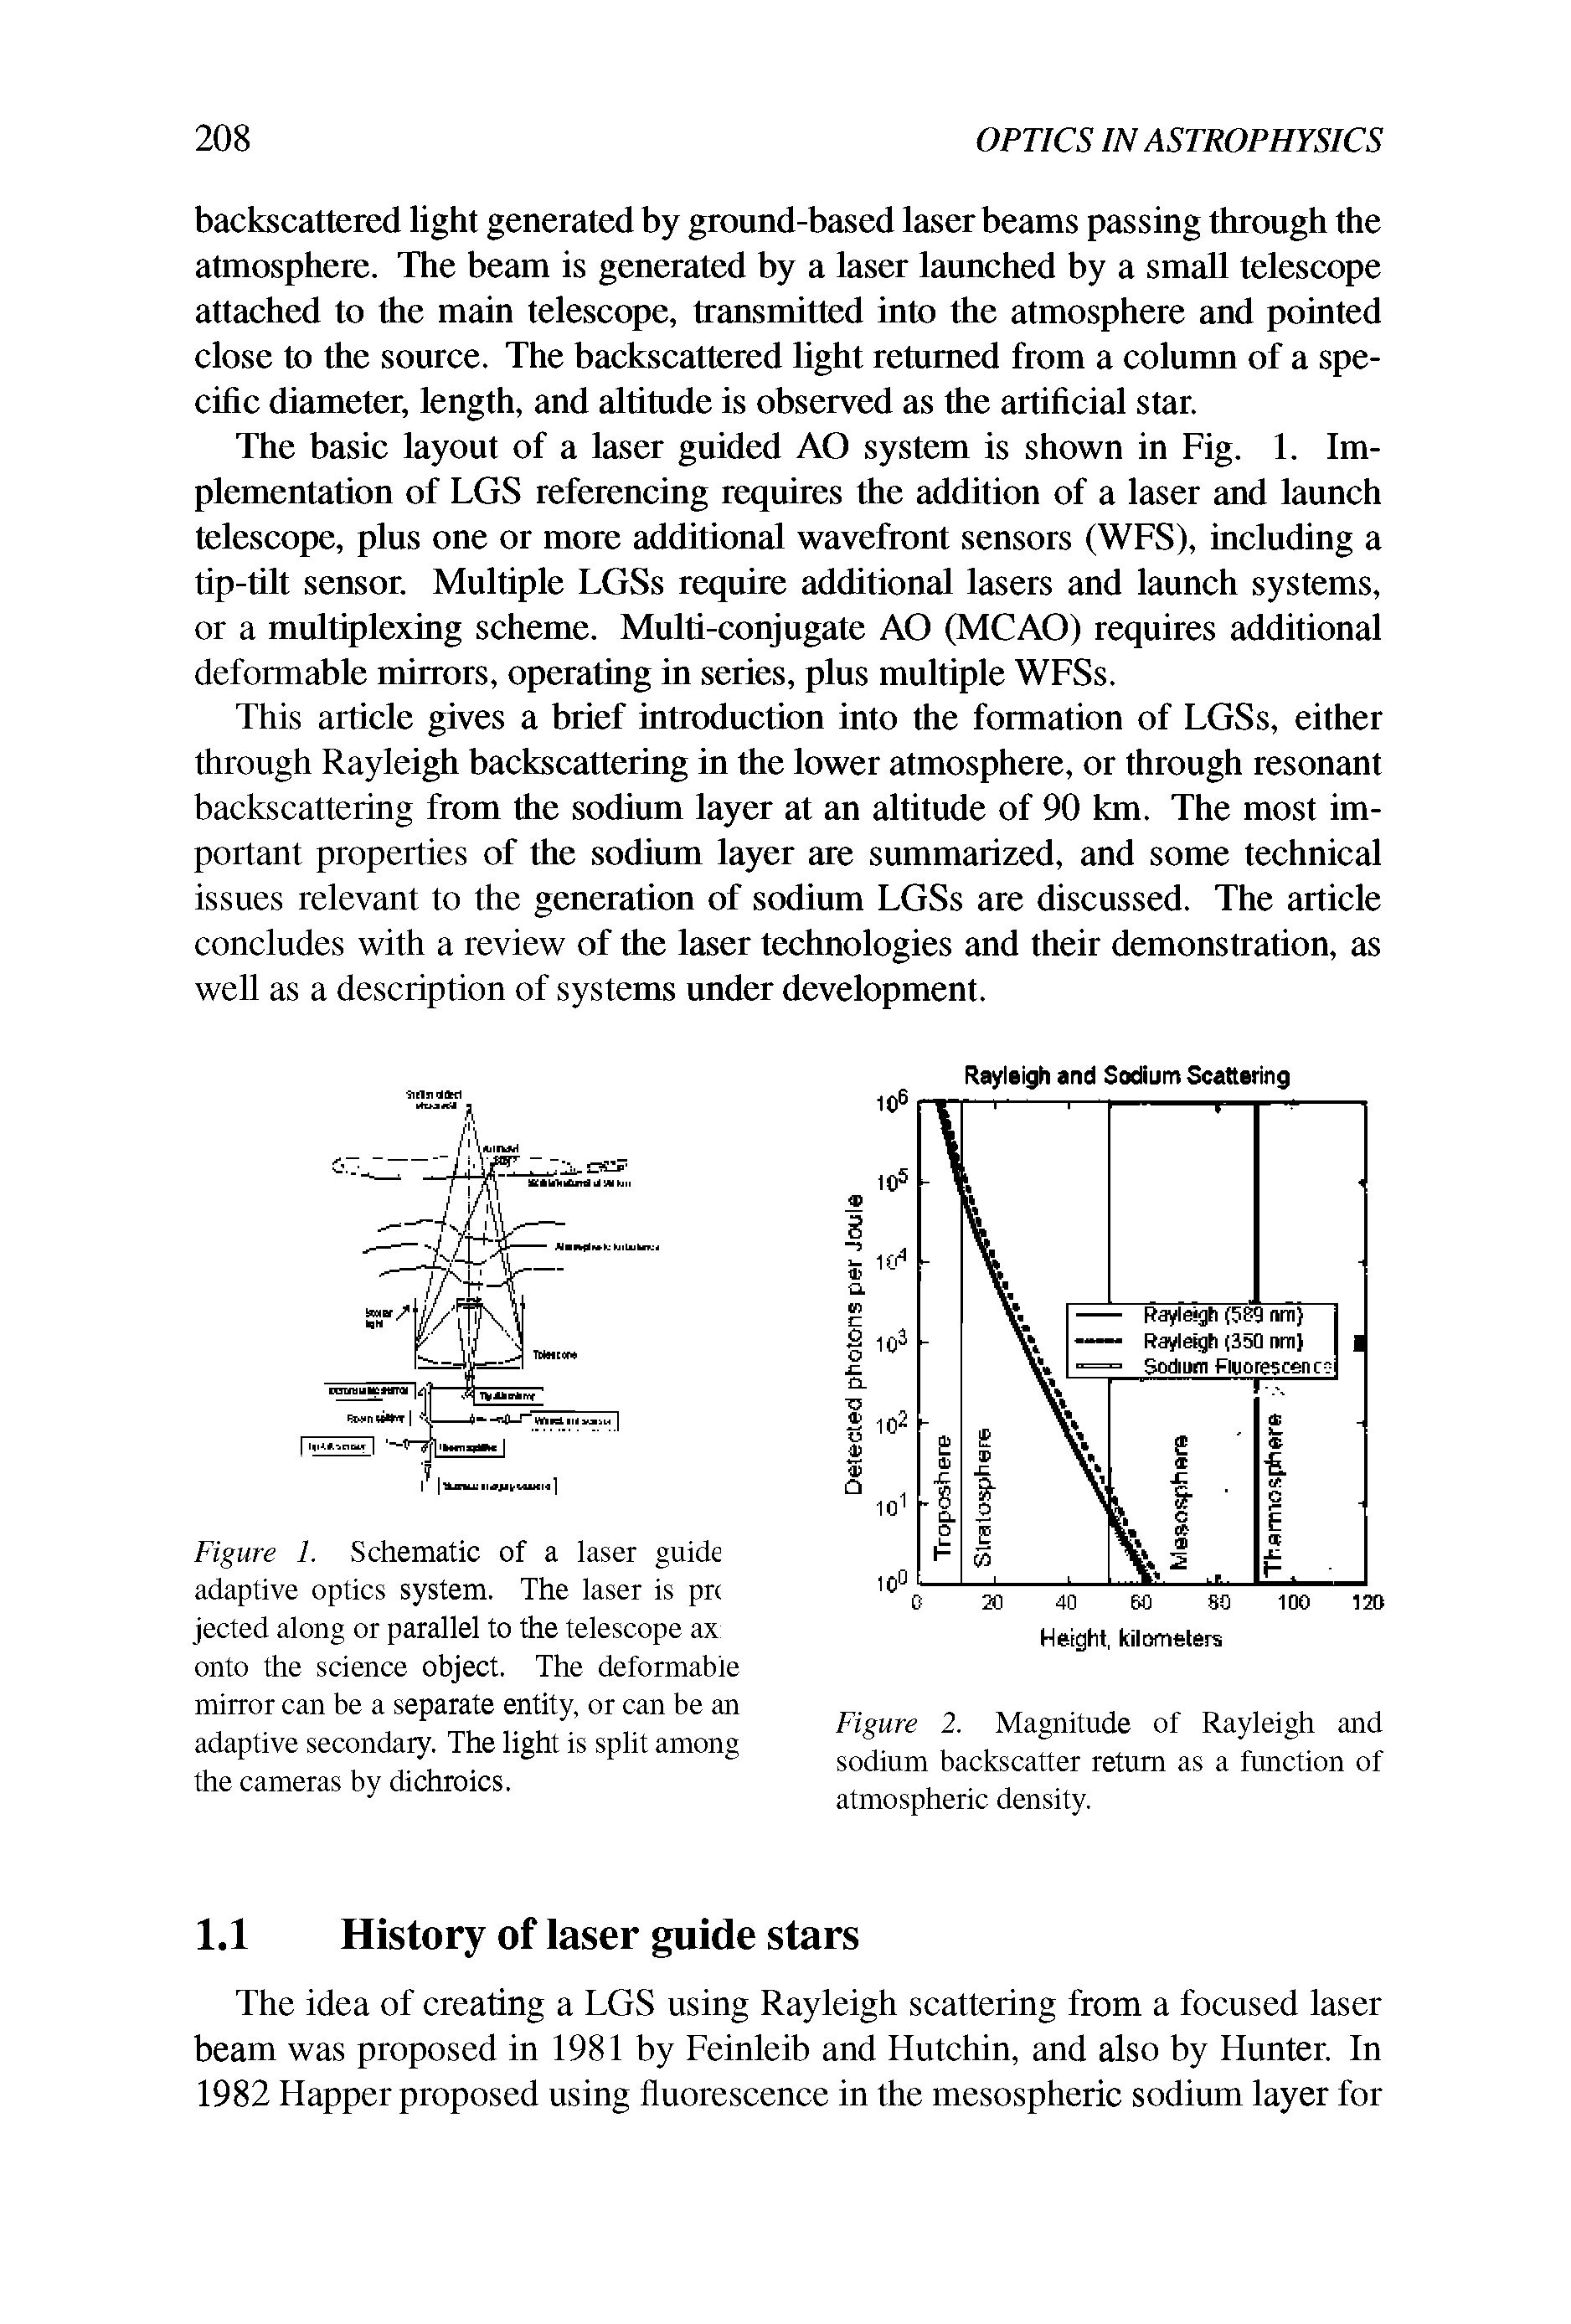 Figure 2. Magnitude of Rayleigh and sodium backscatter return as a function of atmospheric density.